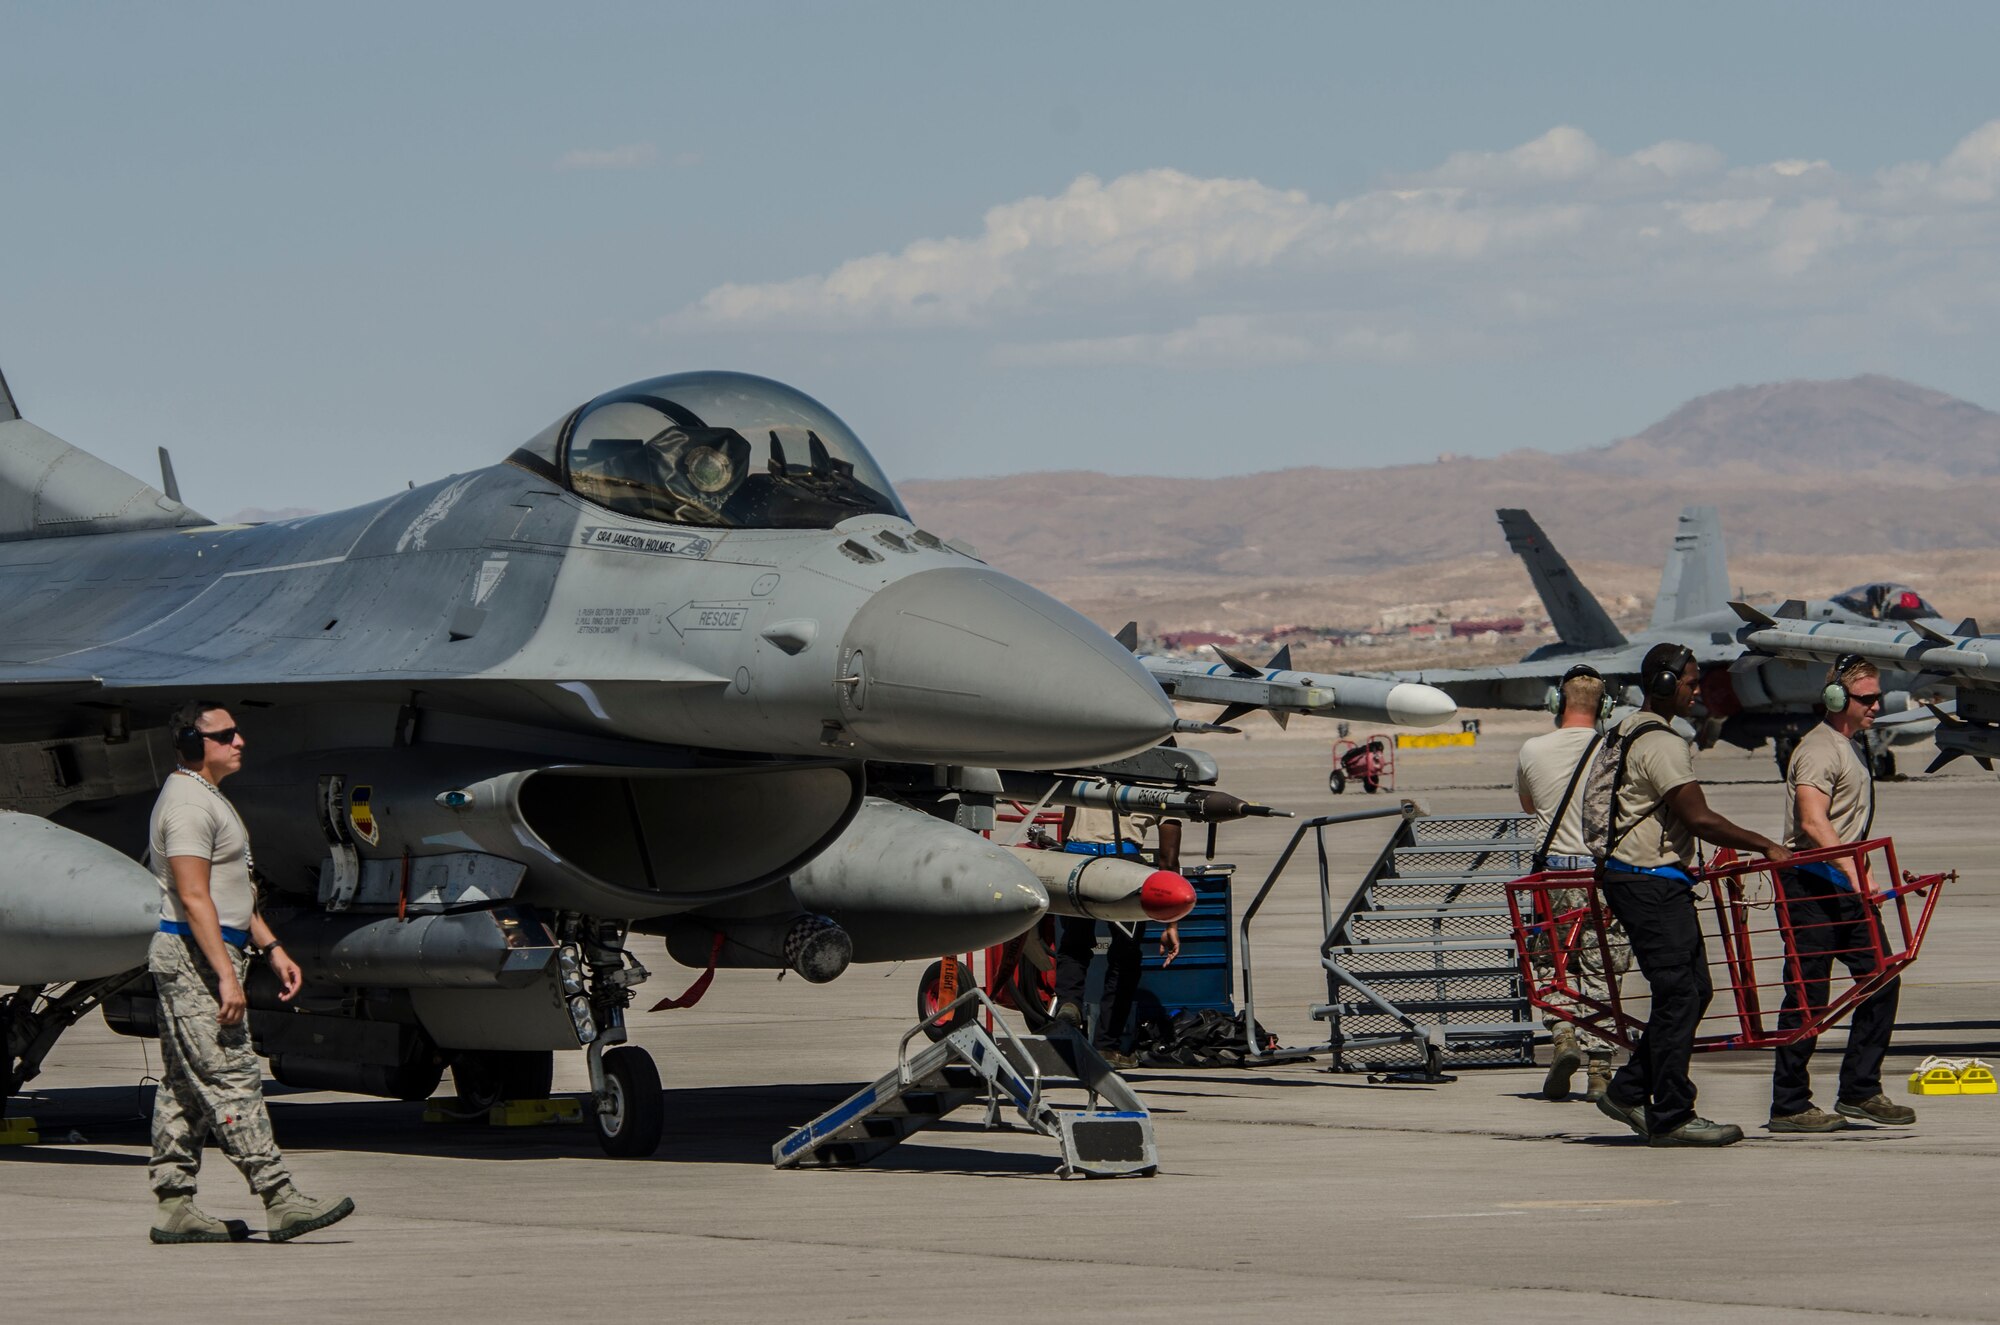 U.S. Air Force maintainers from the 20th Fighter Wing at Shaw Air Force Base, S.C., ready an F‐16CM Fighting Falcon at Nellis Air Force Base, Nev., Aug. 13, 2016. The F‐16 played an intricate part of Red Flag 16‐4 the world’s premiere combat training exercise. (U. S. Air Force photo by Tech. Sgt. Frank Miller/Released)